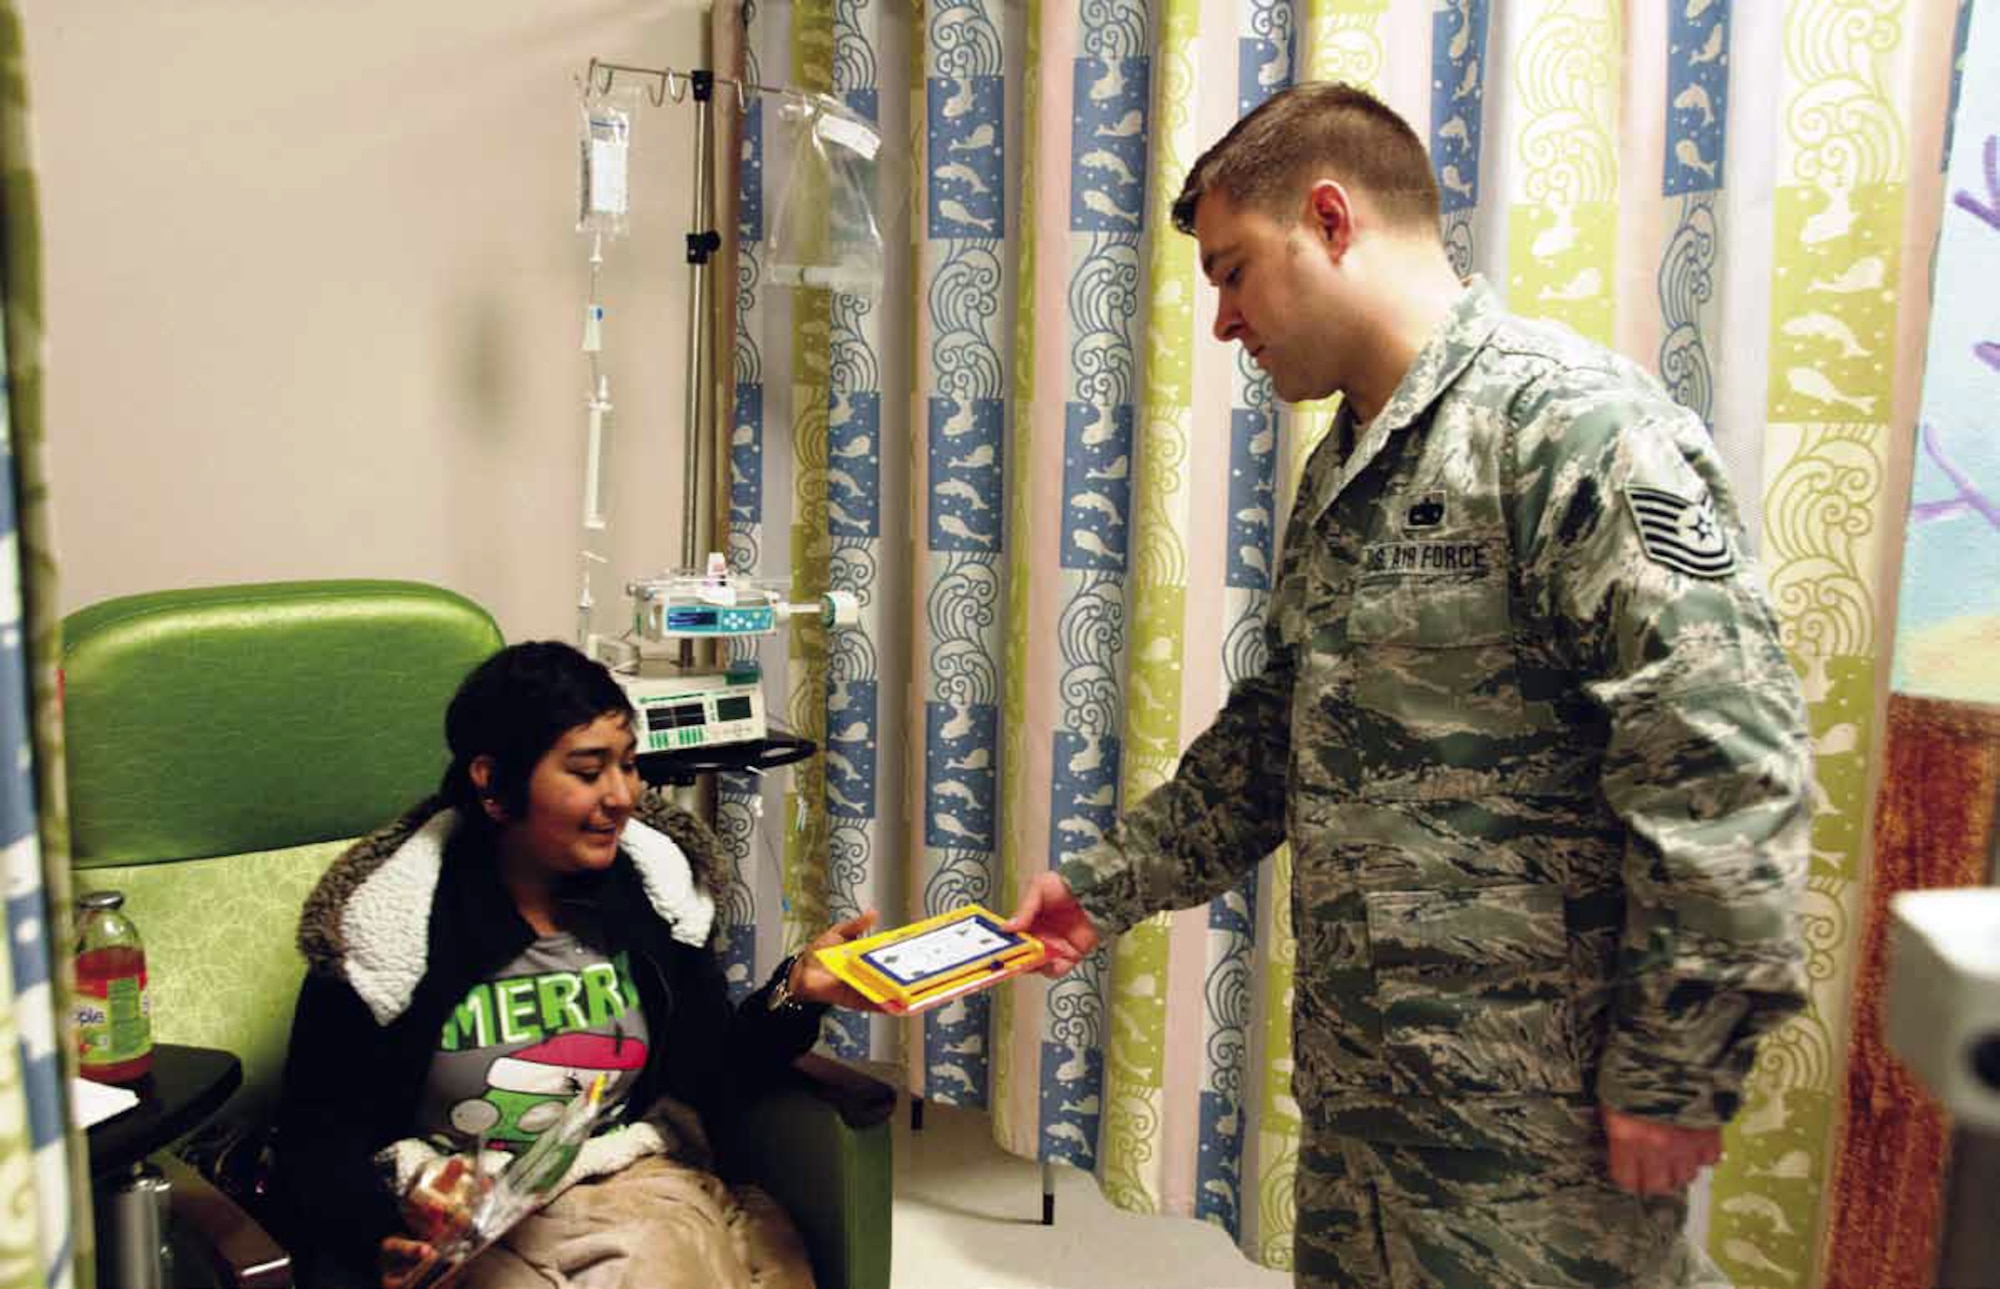 Technical Sgt. Christopher Bromm, 163d Maintenance Group, delivers toys to children who are patients at the Loma Linda University Children's Hospital, Dec. 14, 2012. The Airmen from the California Air National Guard wanted to visit and brighten the children's day with gifts as the children receive care at the out-patient center where they often have to go a few times a week. (U.S. Air Force photo by Master Sgt. Julie Avey)